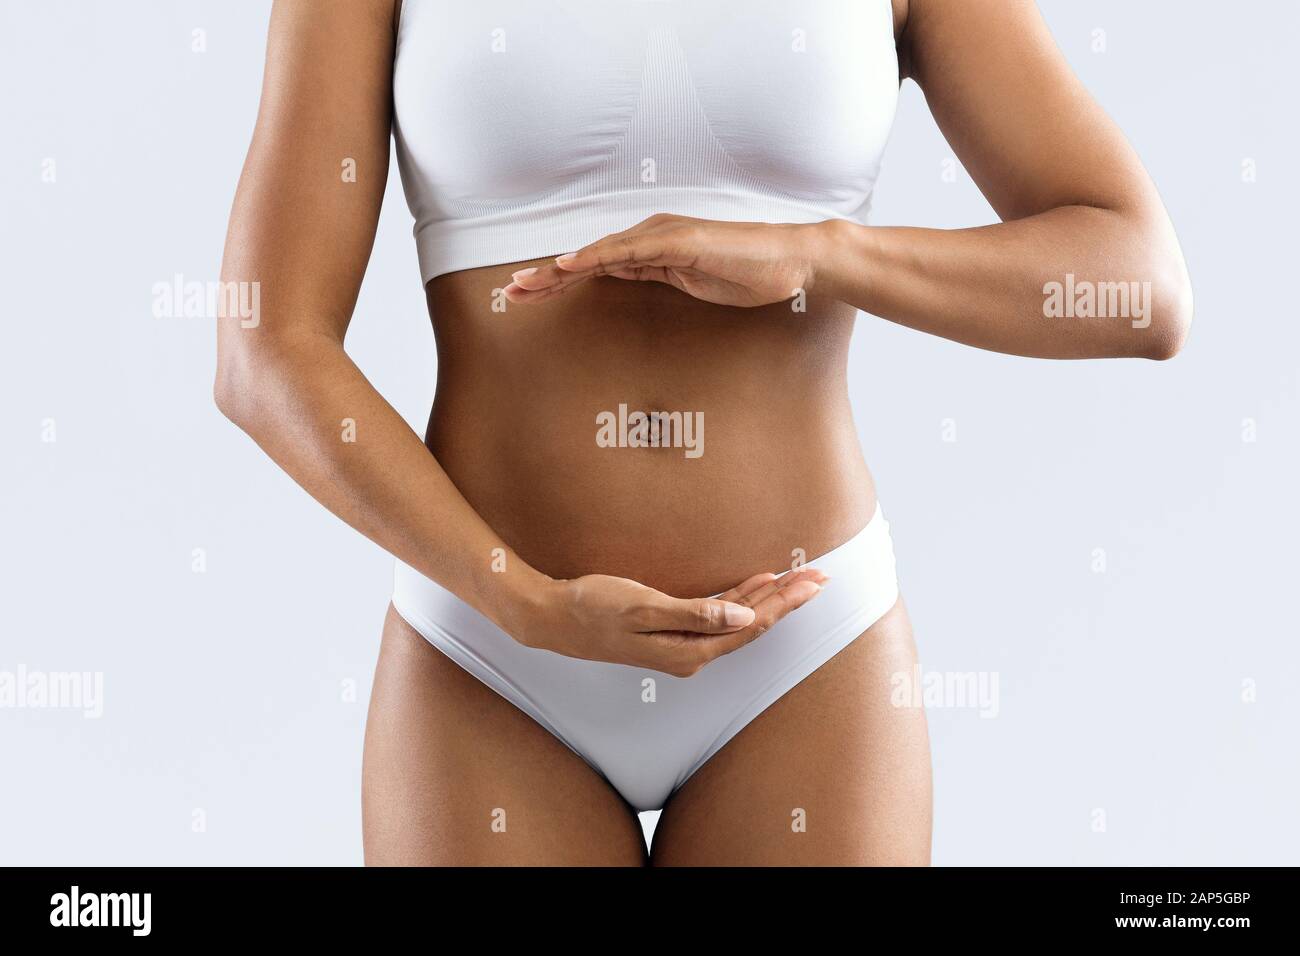 Afro woman holding her hands next to flat tummy Stock Photo